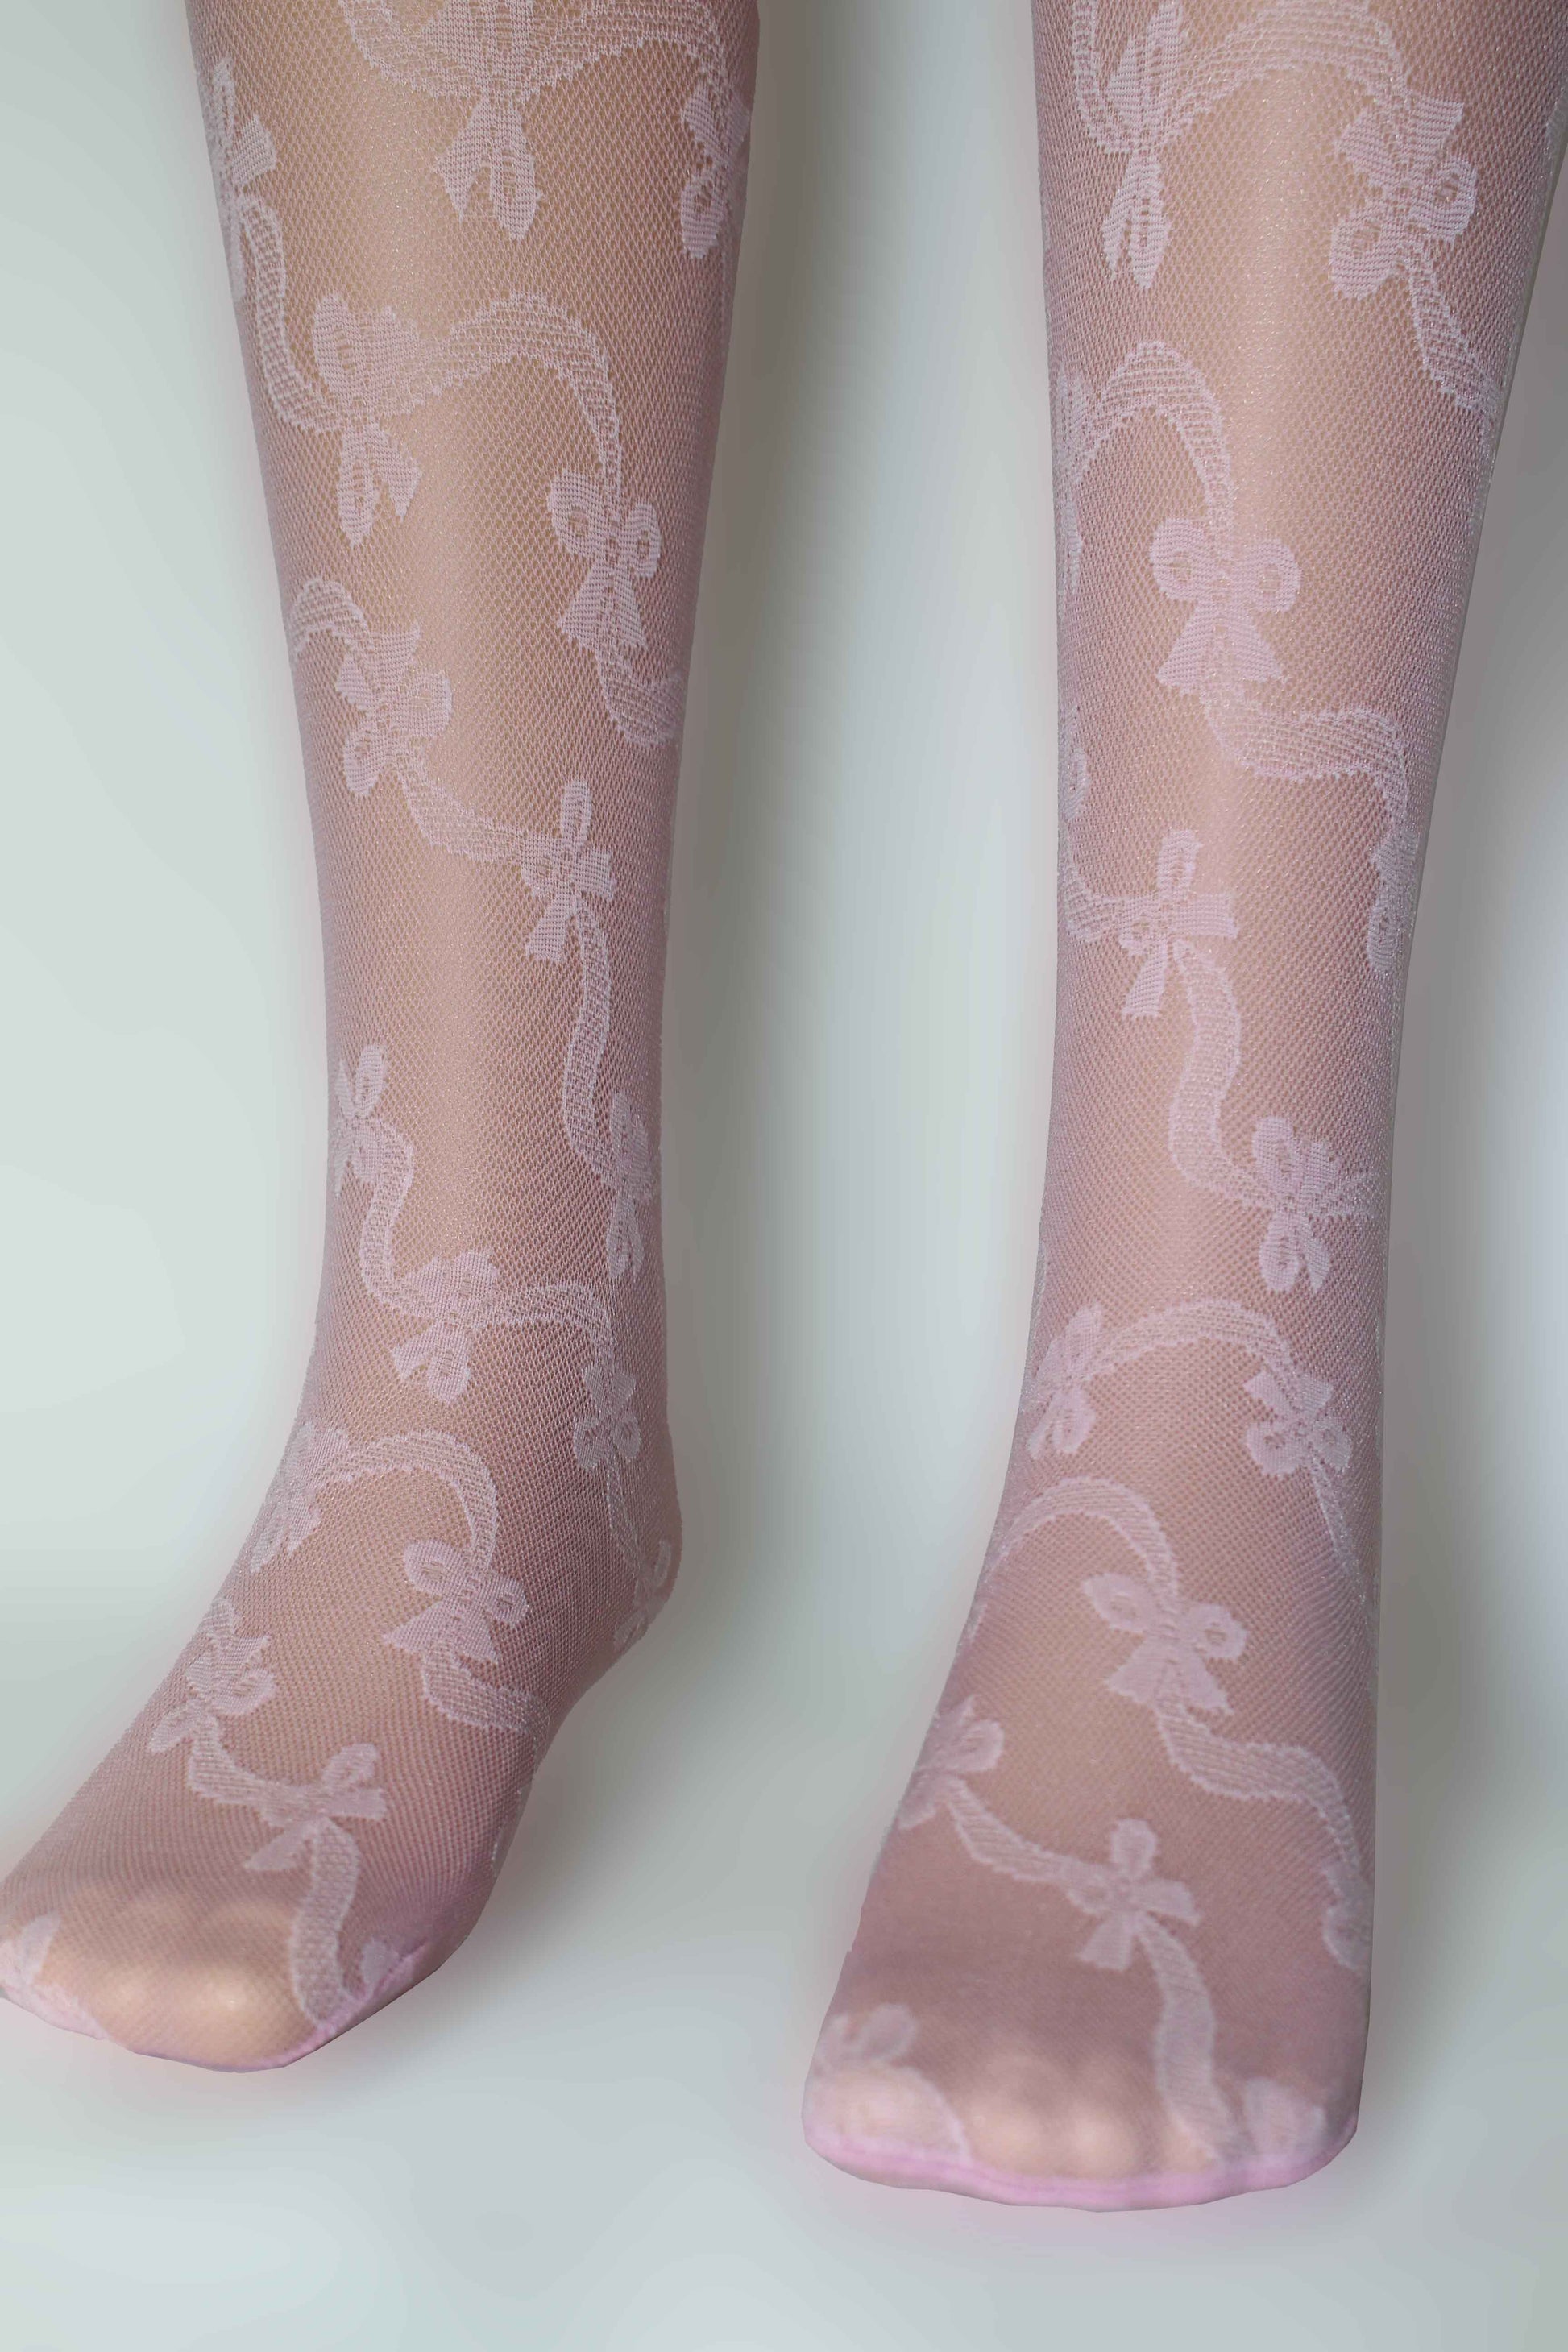 Omsa Serenella Gala Kid's tights - Light pale pink semi opaque micro mesh children's fashion tights with a woven ribbon and bow style pattern wrapping diagonally around the leg.